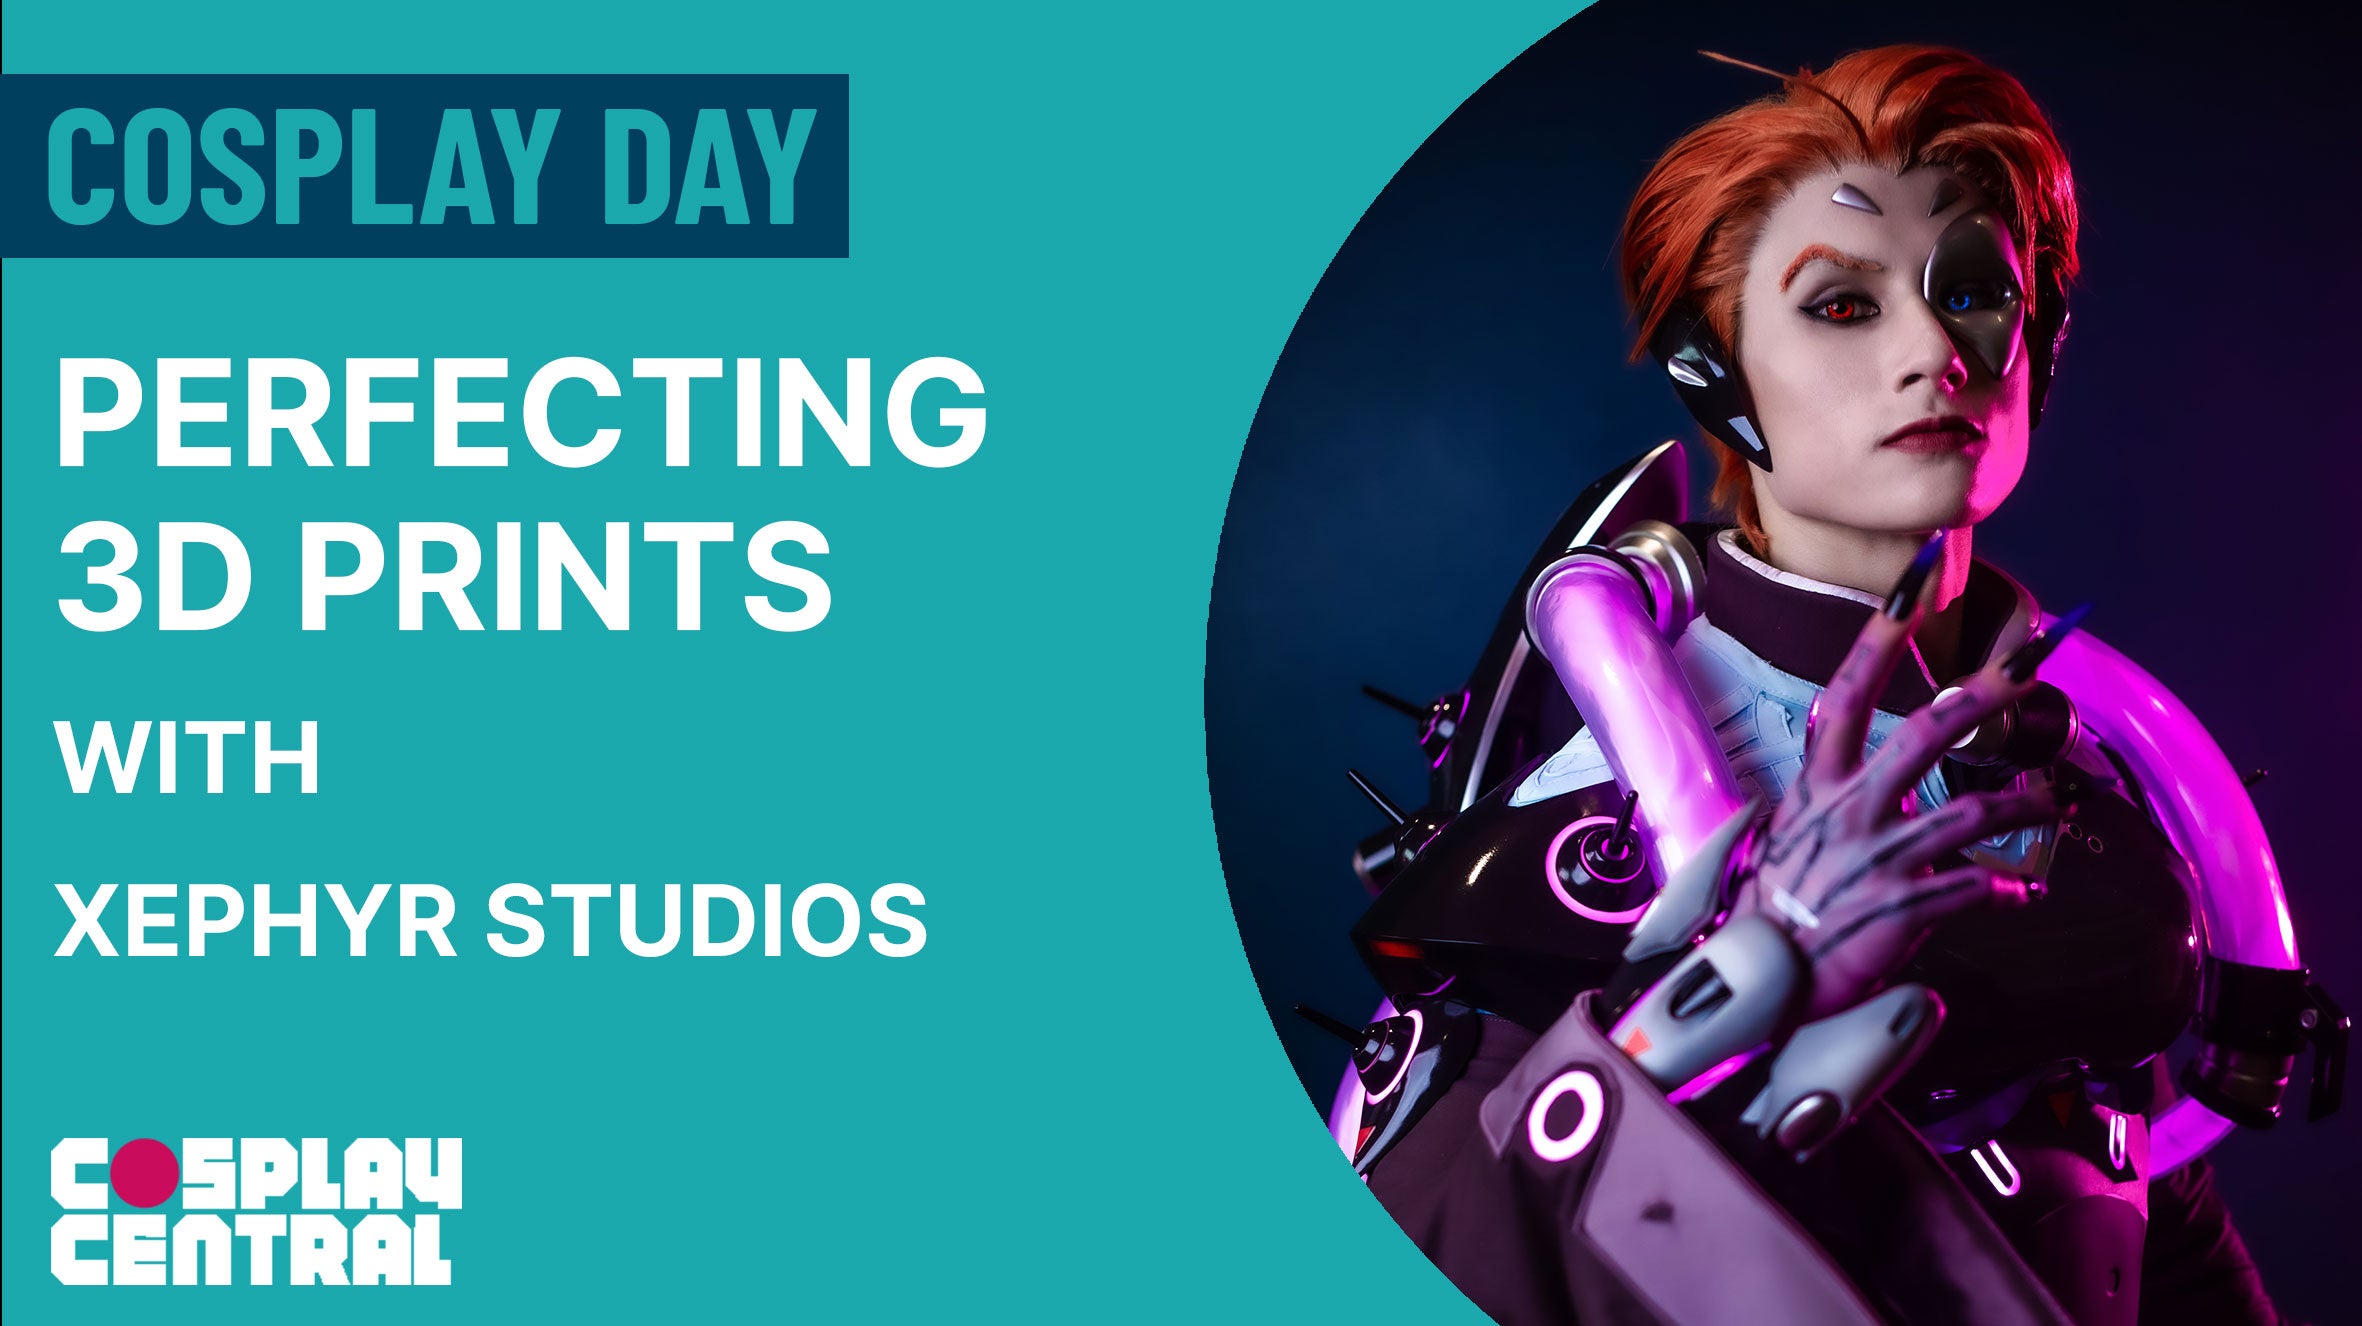 Image for Perfecting 3D Prints with Xephyr Studios - Cosplay Day 2021